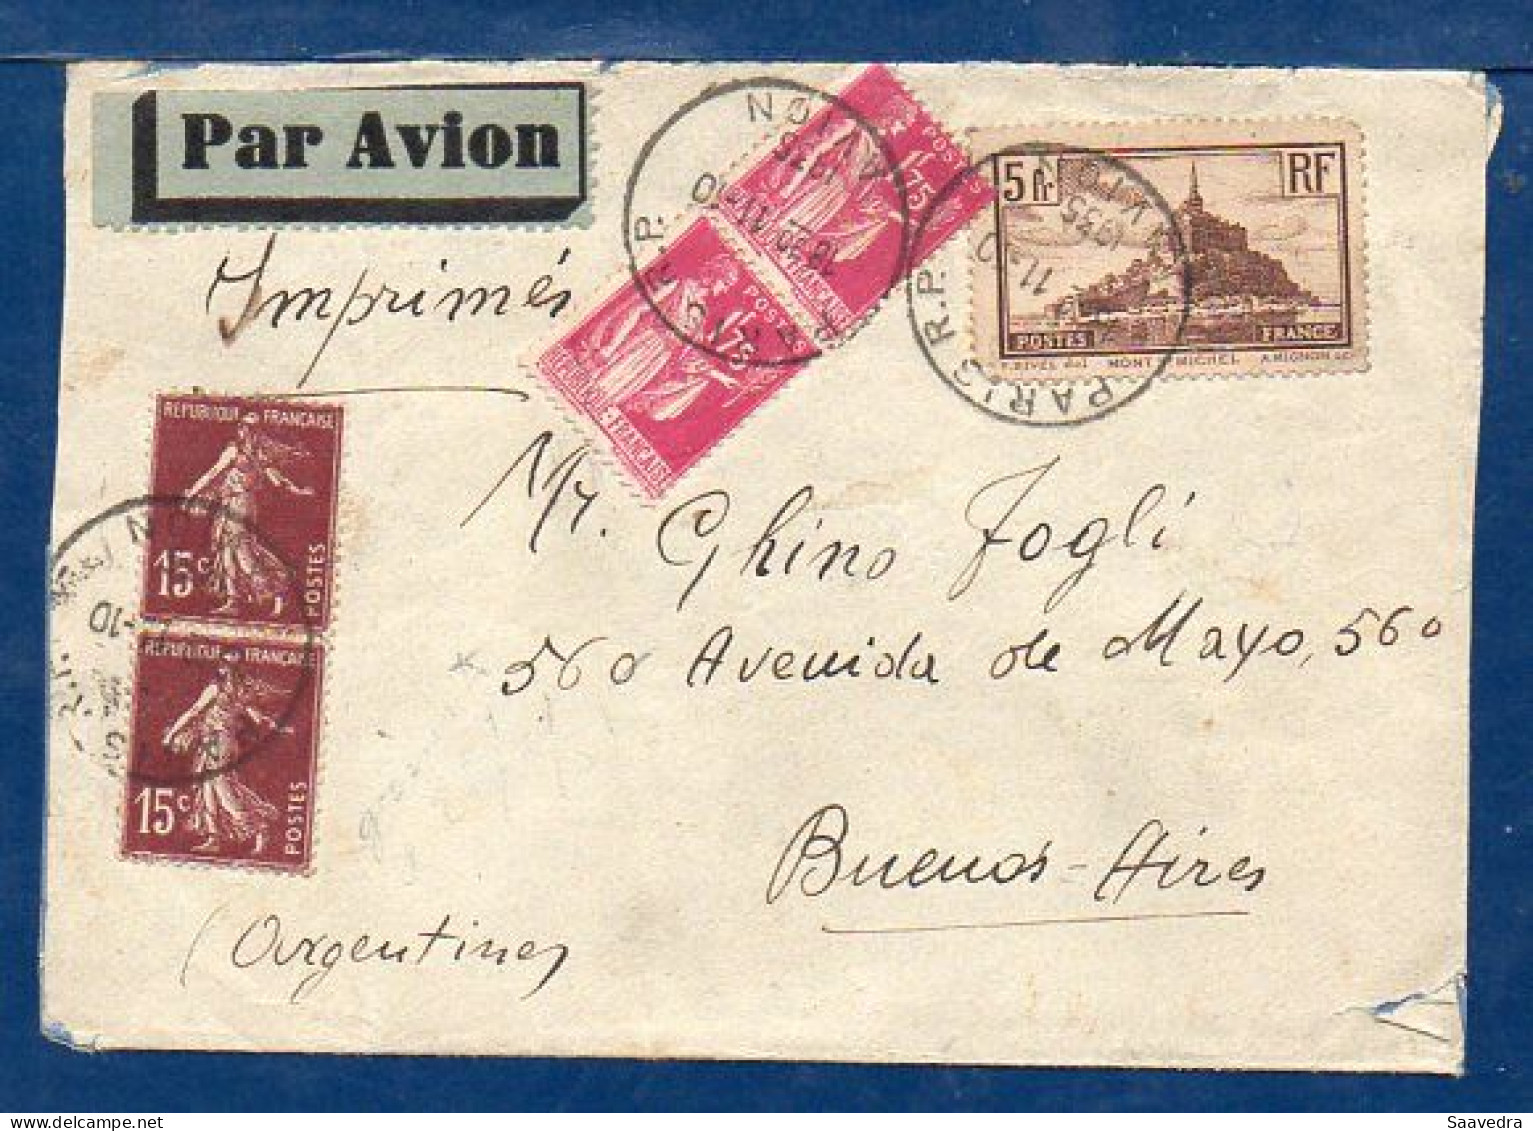 France To Argentina, 1935, Via Air France  (006) - Covers & Documents